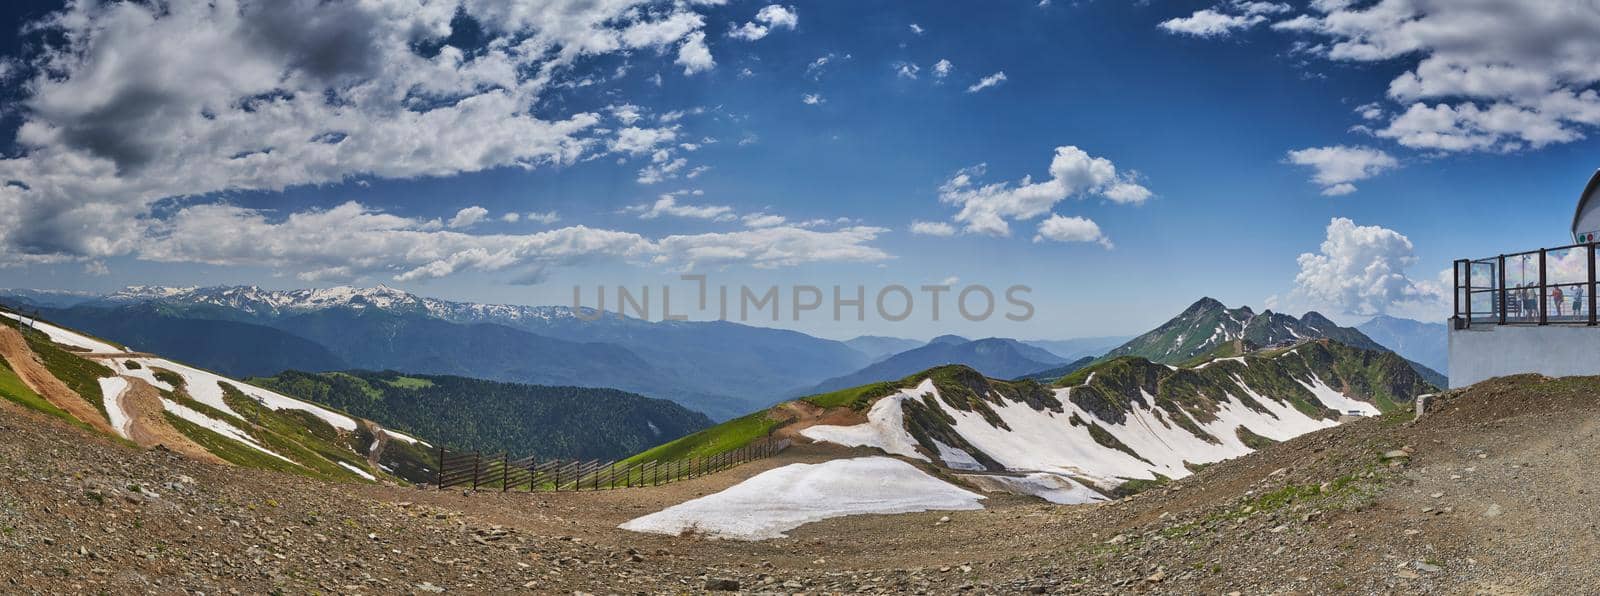 Summer panorama of mountains from 2320 meters, an observation deck, the top point of ski slopes in Sochi, the snow remains on slopes by vladimirdrozdin